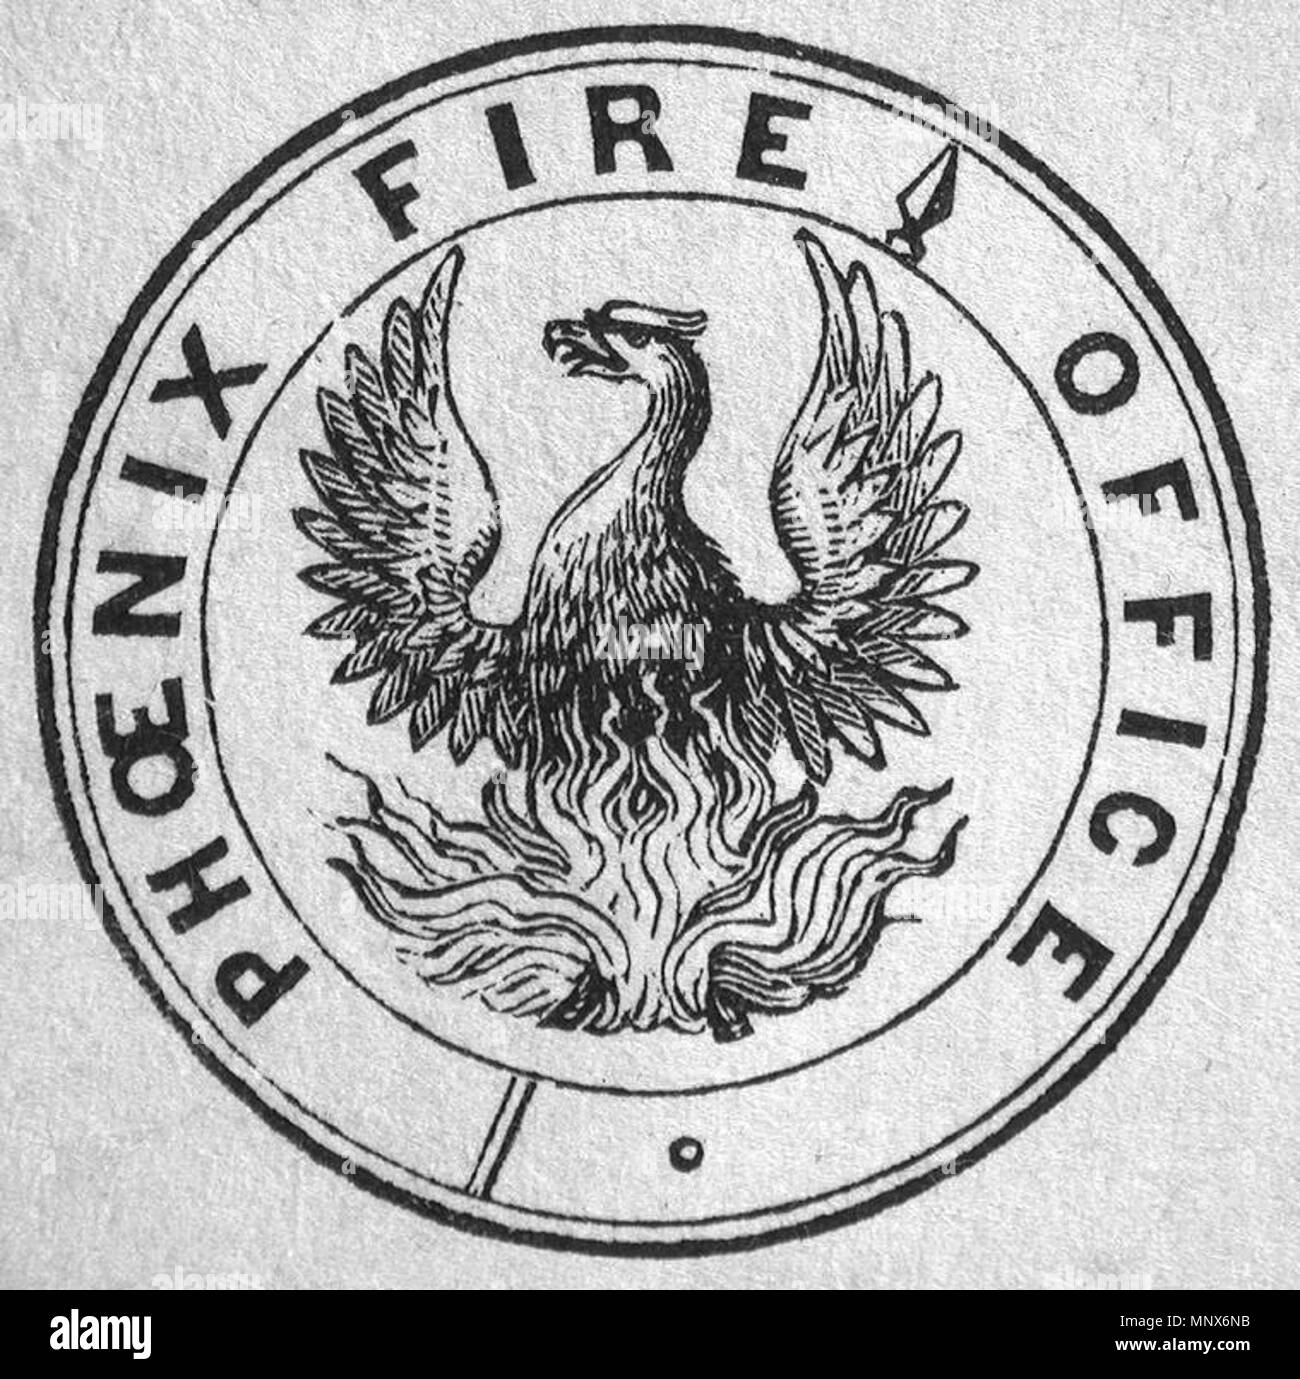 . English: Engraving, Seal, Phoenix Fire Office, John Henry Walker (1831-1899) 1850-1885, Ink on paper on supporting paper - Wood engraving, 4.1 x 4.7 cm Français : Gravure, Sceau du Phoenix Fire Office, John Henry Walker (1831-1899), 1850-1885, Encre sur papier - Gravure sur bois, 4.1 x 4.7 cm . between 1850 and 1885. John Henry Walker (1831-1899) 1107 Seal, Phoenix Fire Office Stock Photo